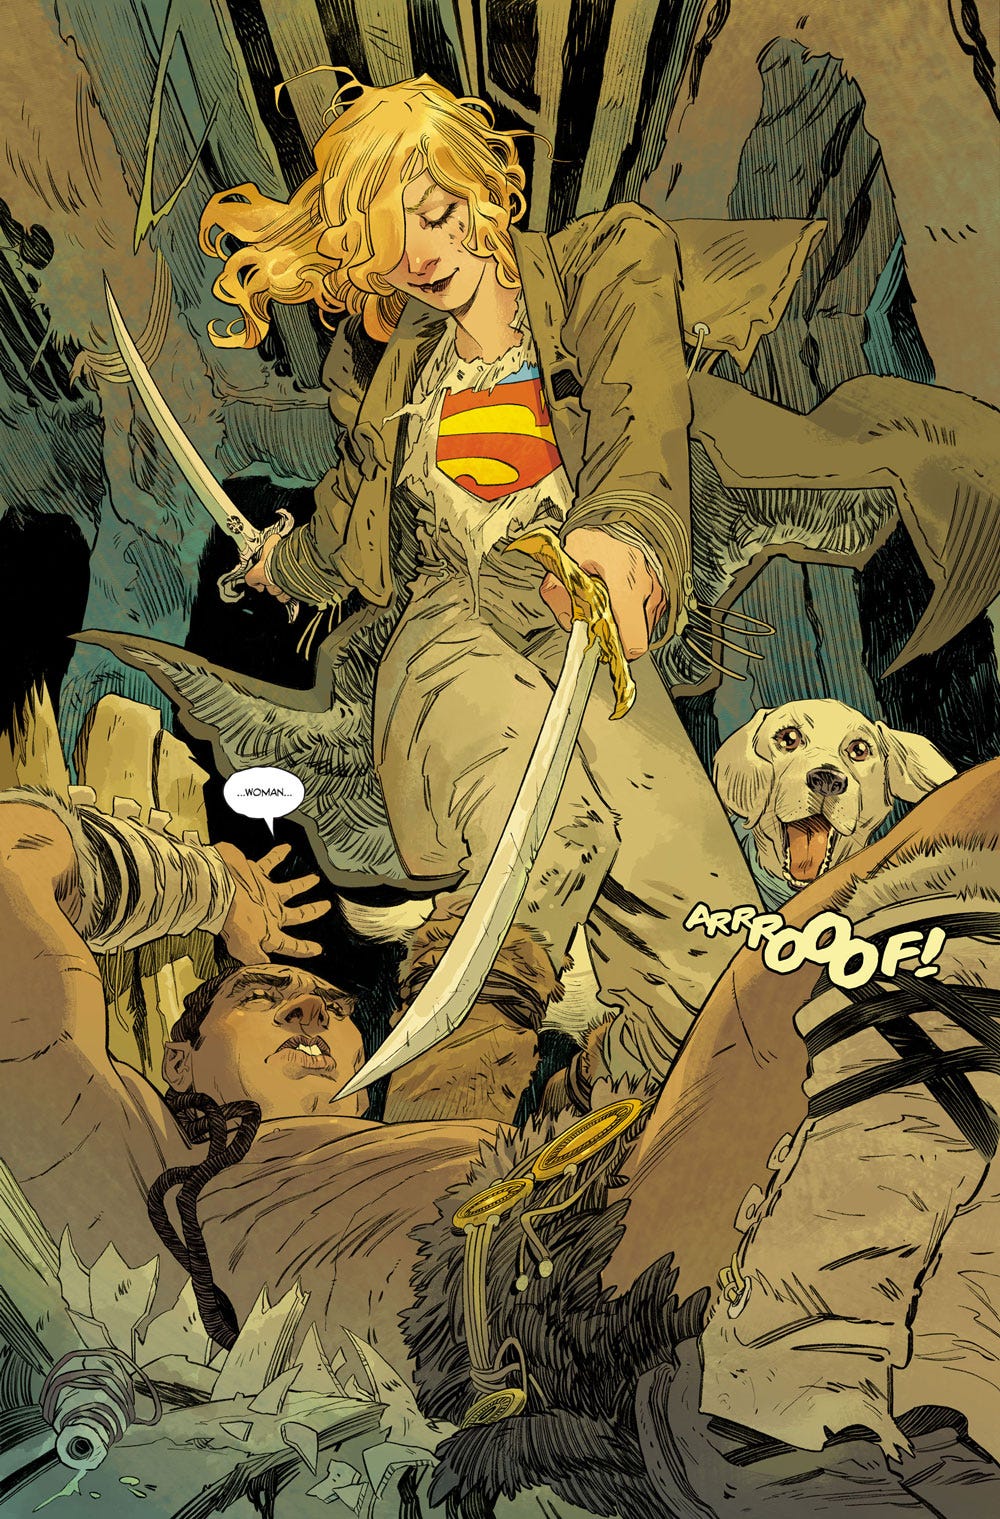 Weird Science DC Comics: Supergirl: Woman of Tomorrow #1 Review